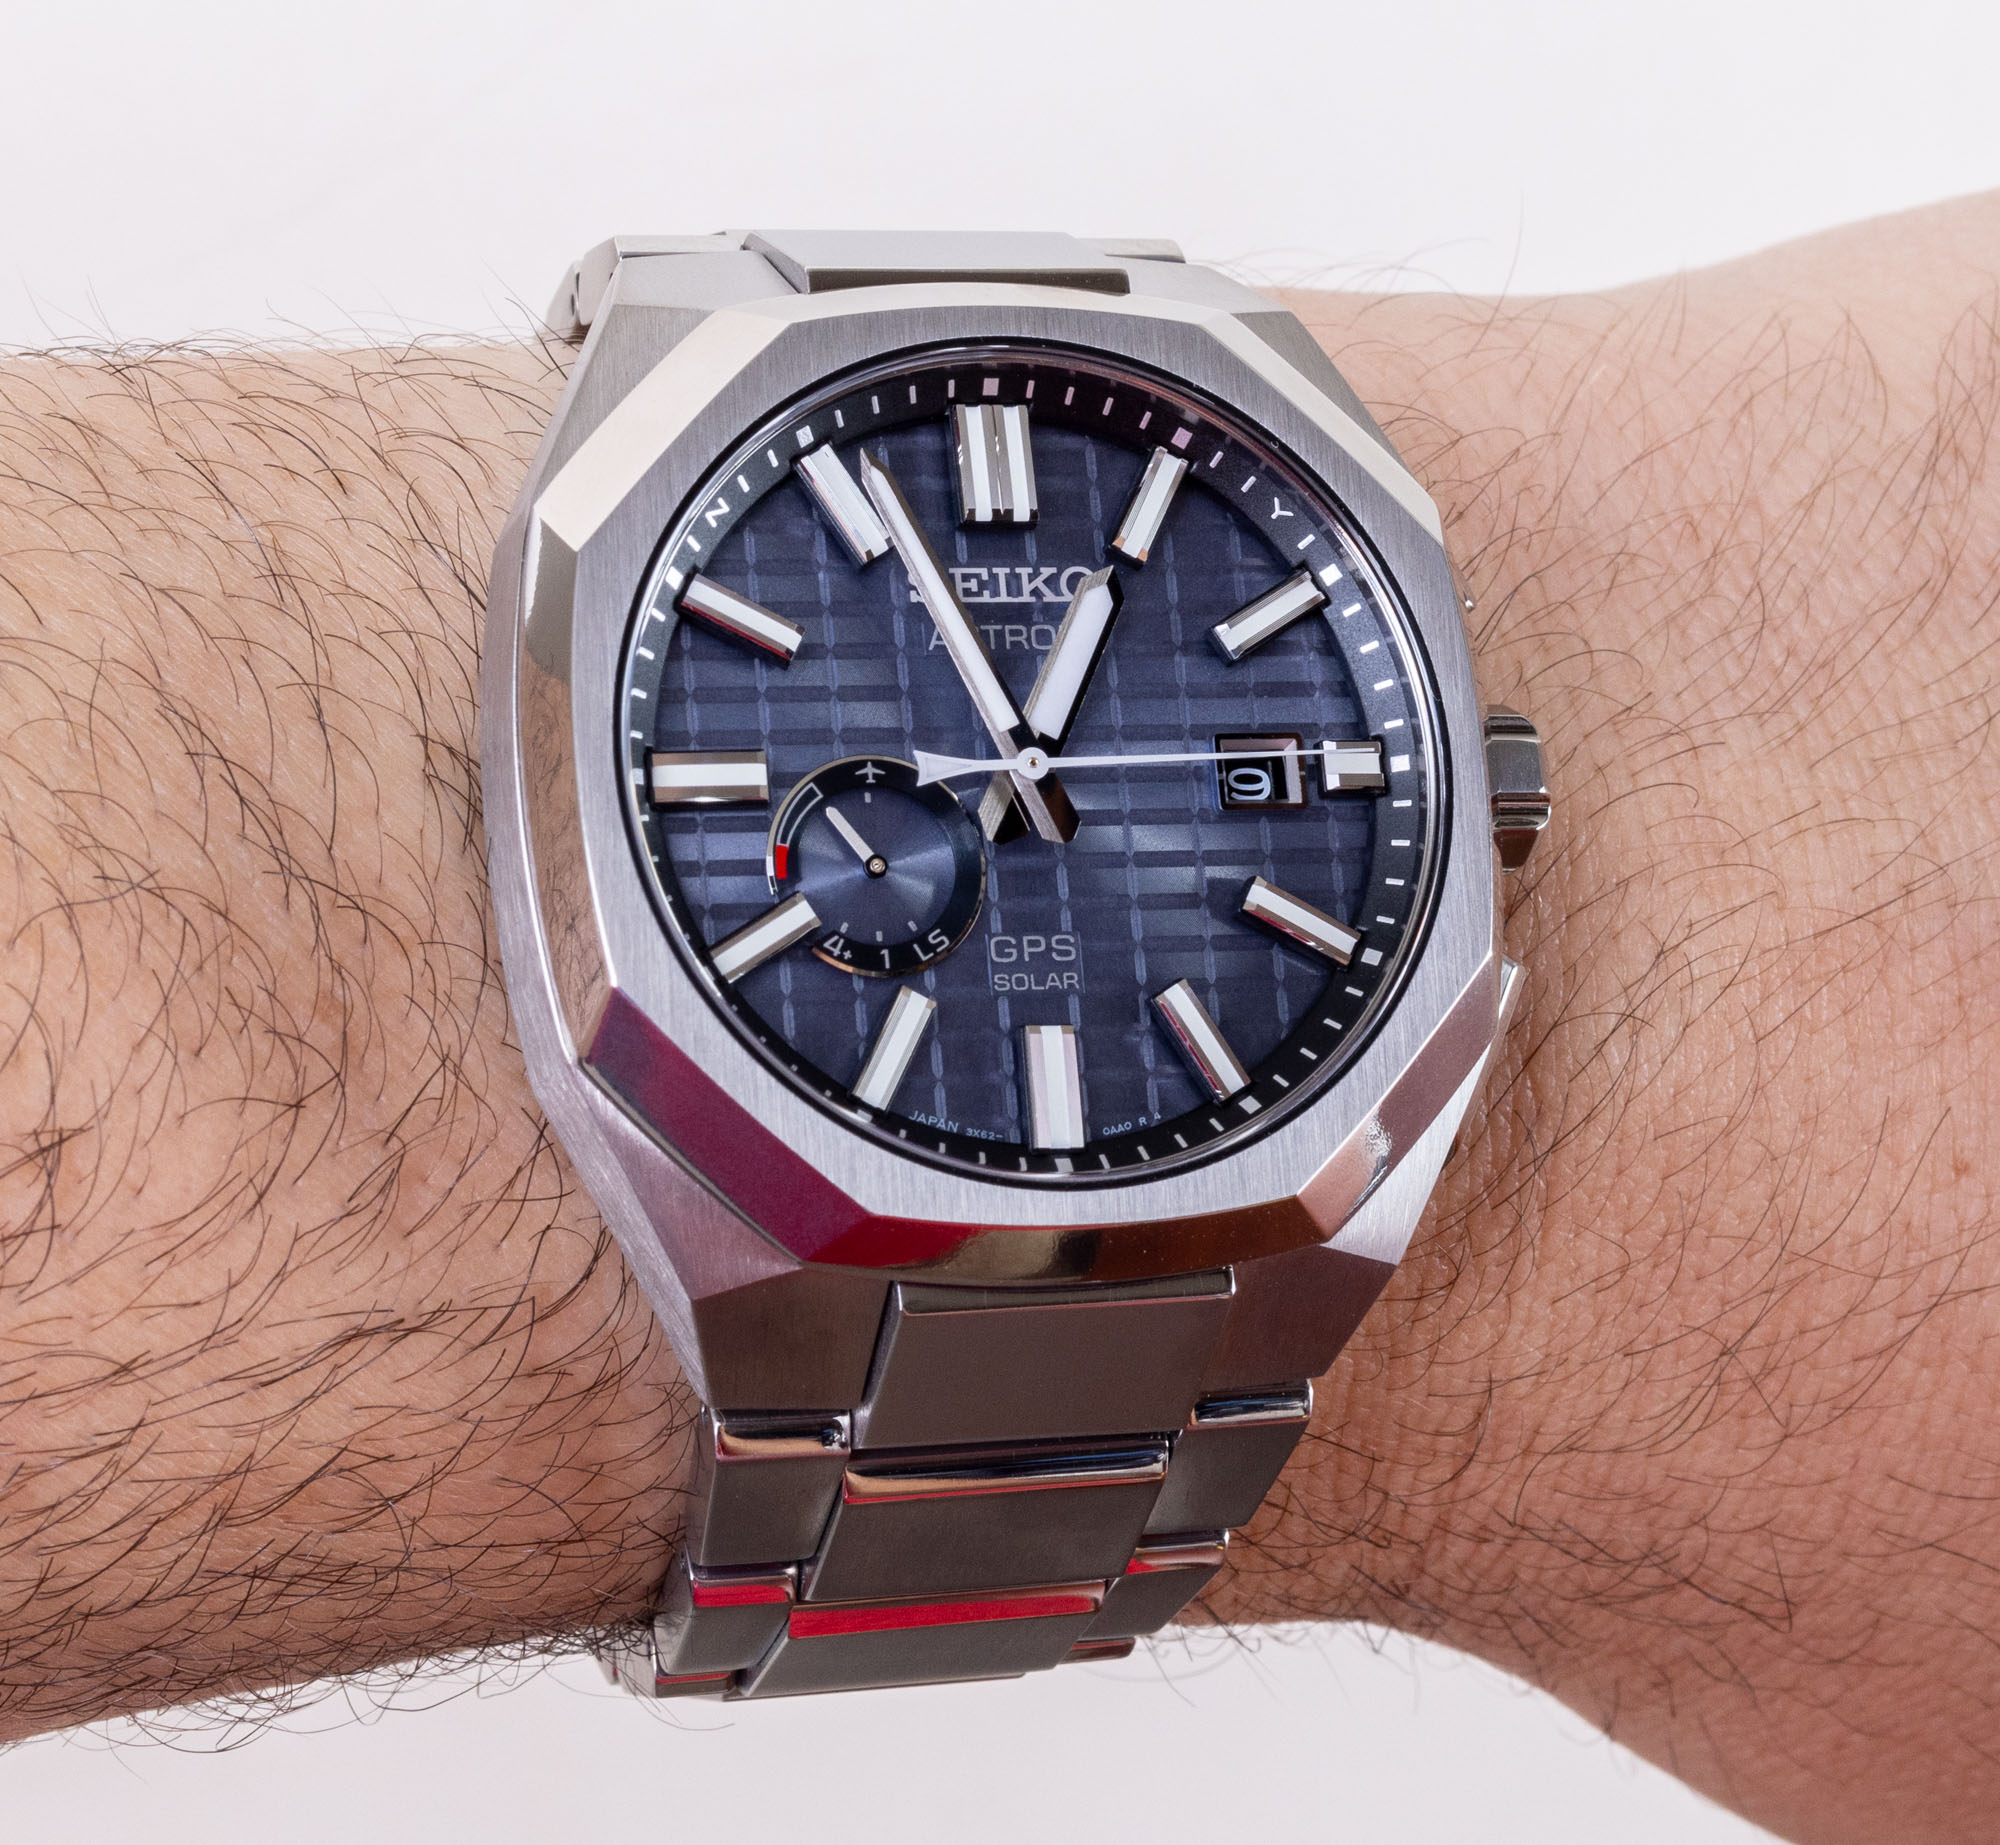 This or Something Similar? : r/Watches